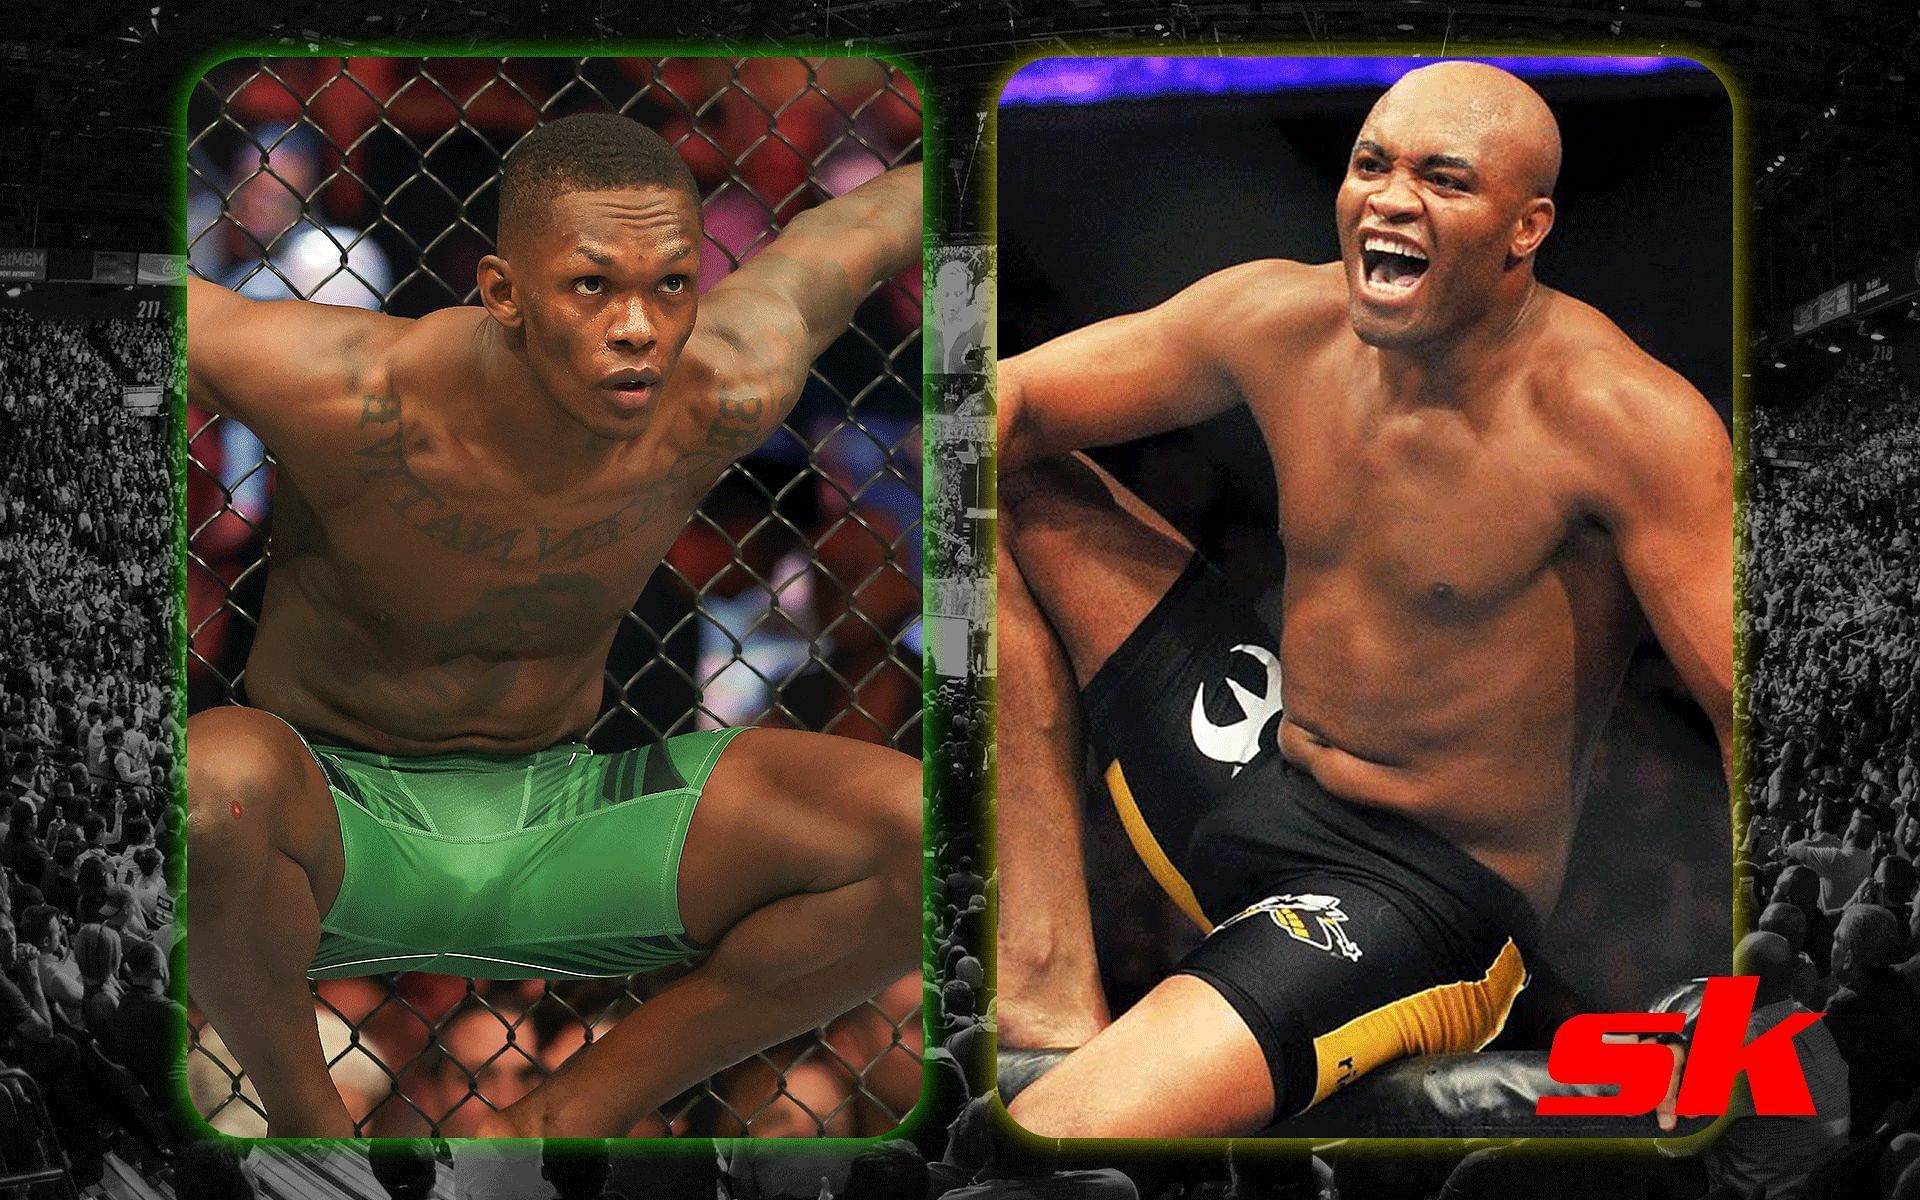 10 Years After Swearing to End Anderson Silva's Reign, Former